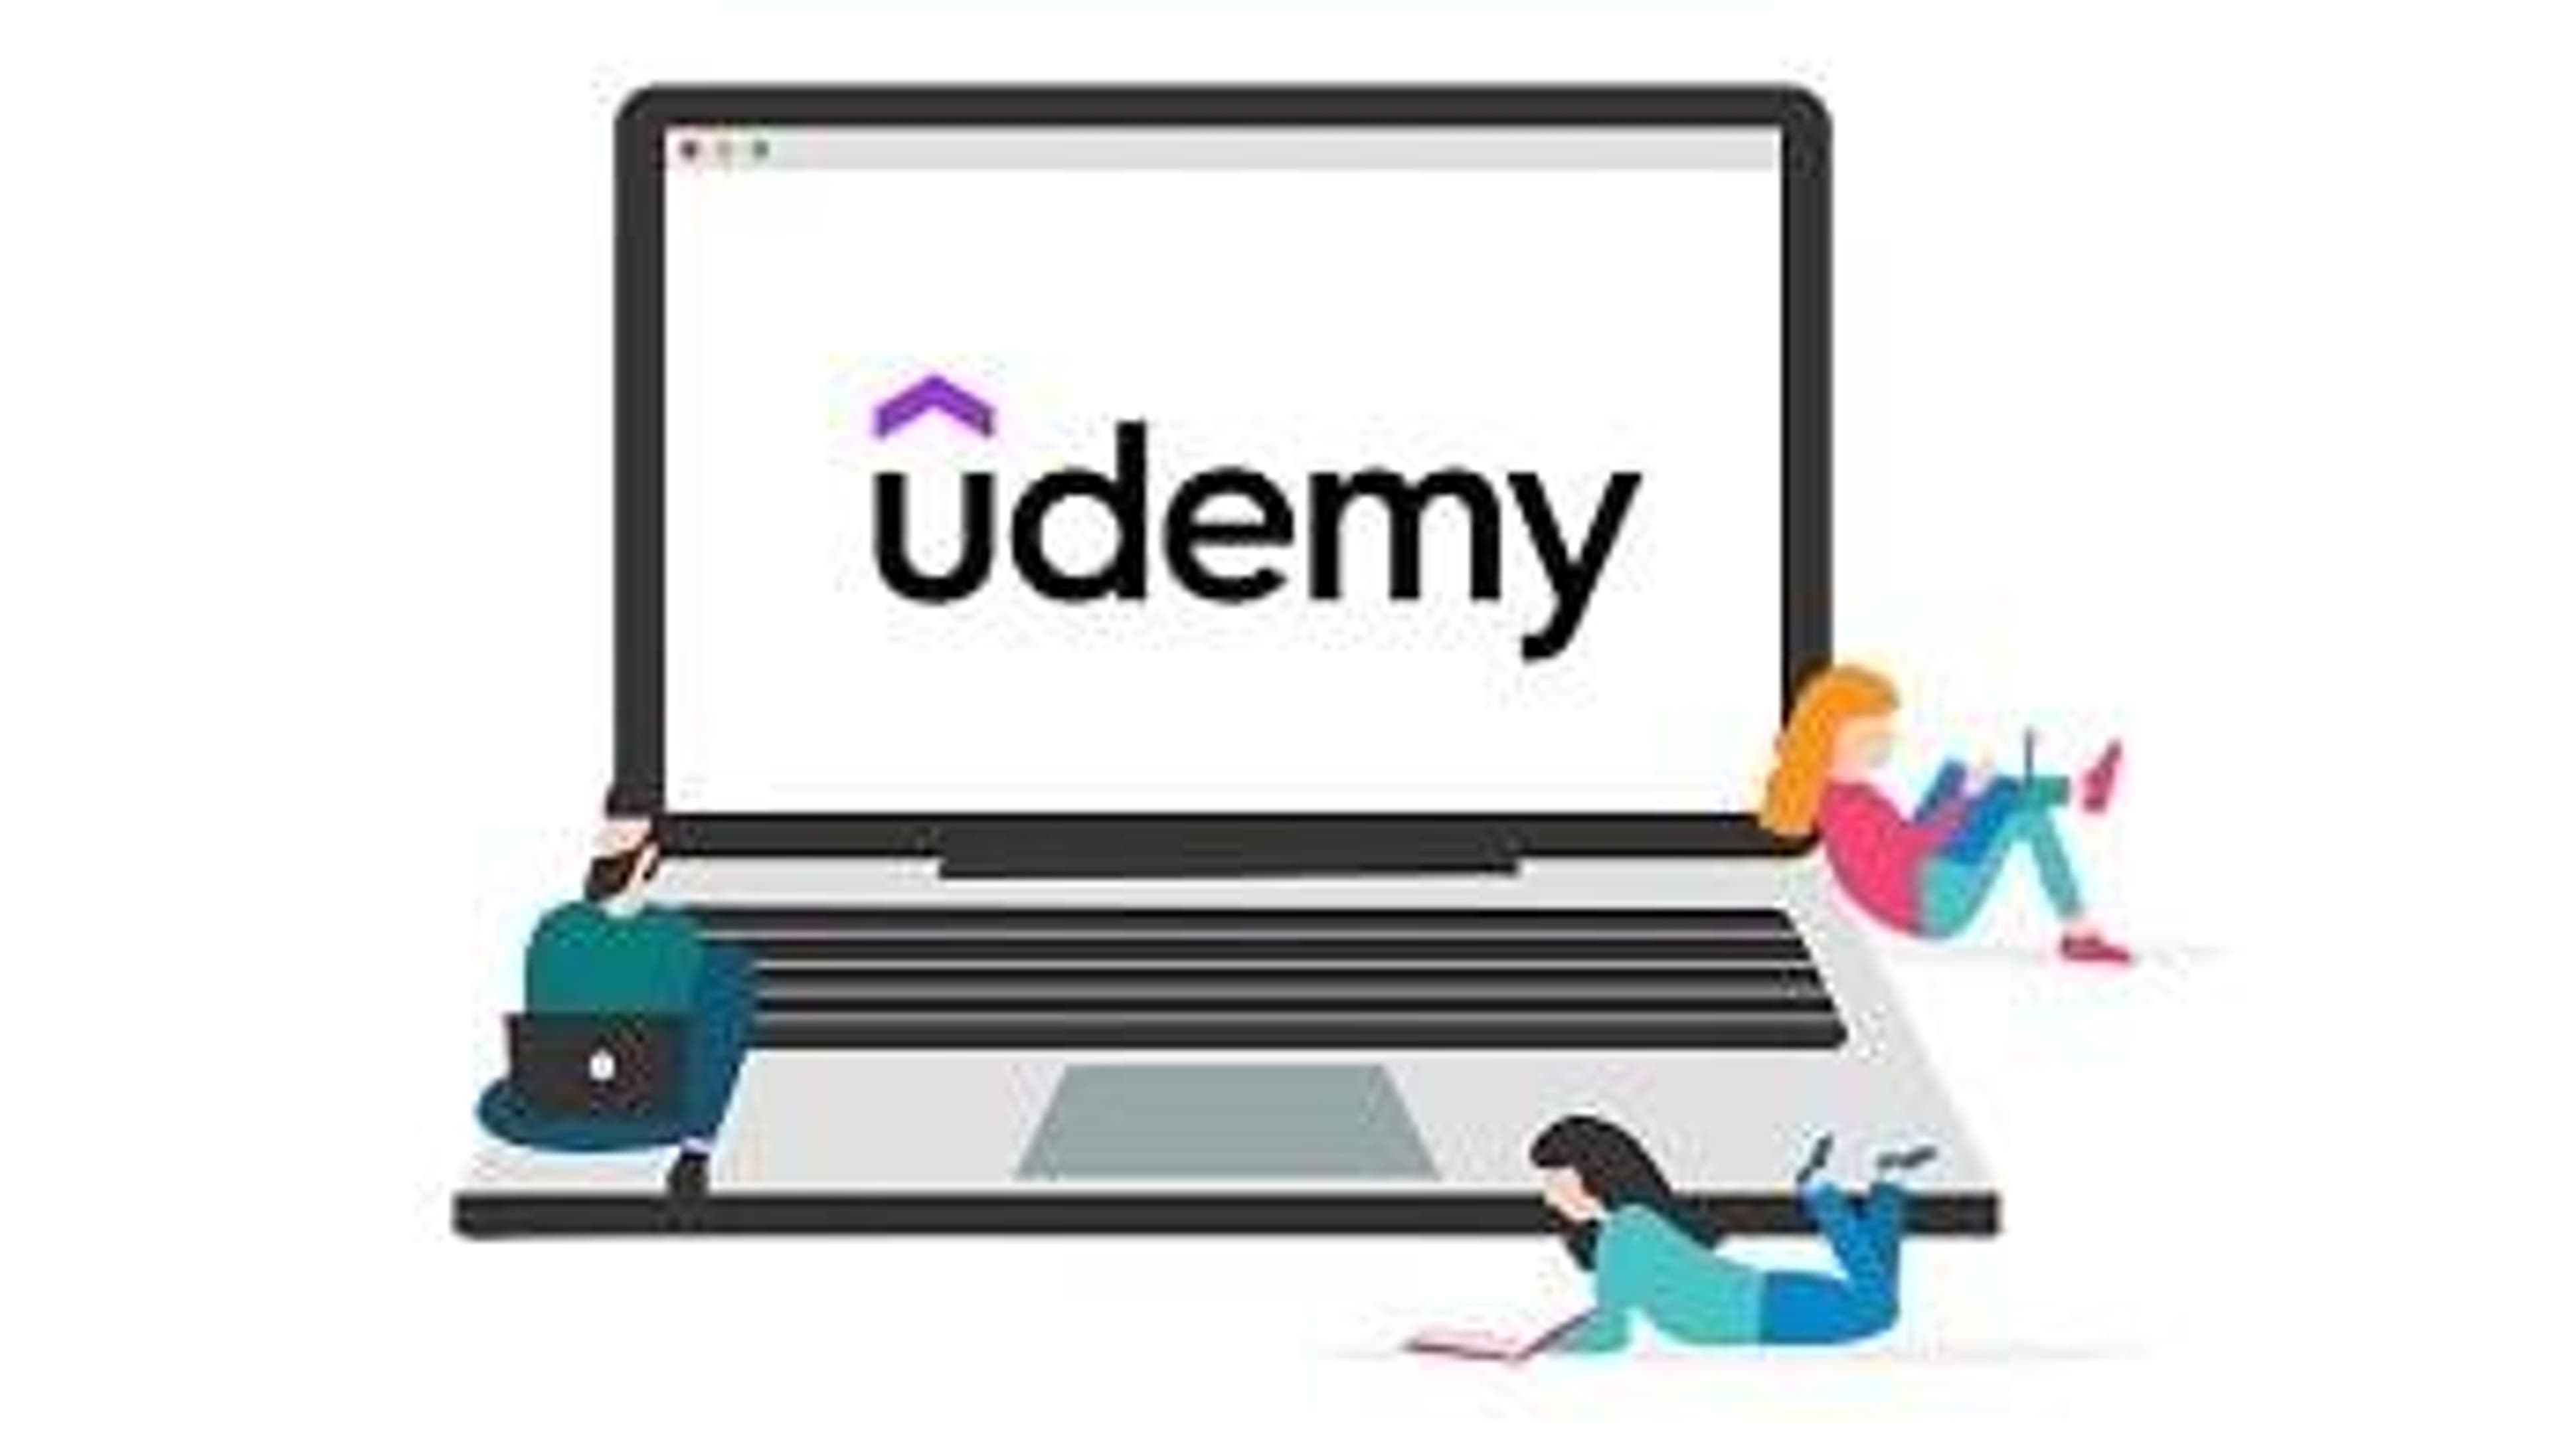  The Udemy Logo on a cartoon laptop surrounded by people studying using books, phones & laptops 